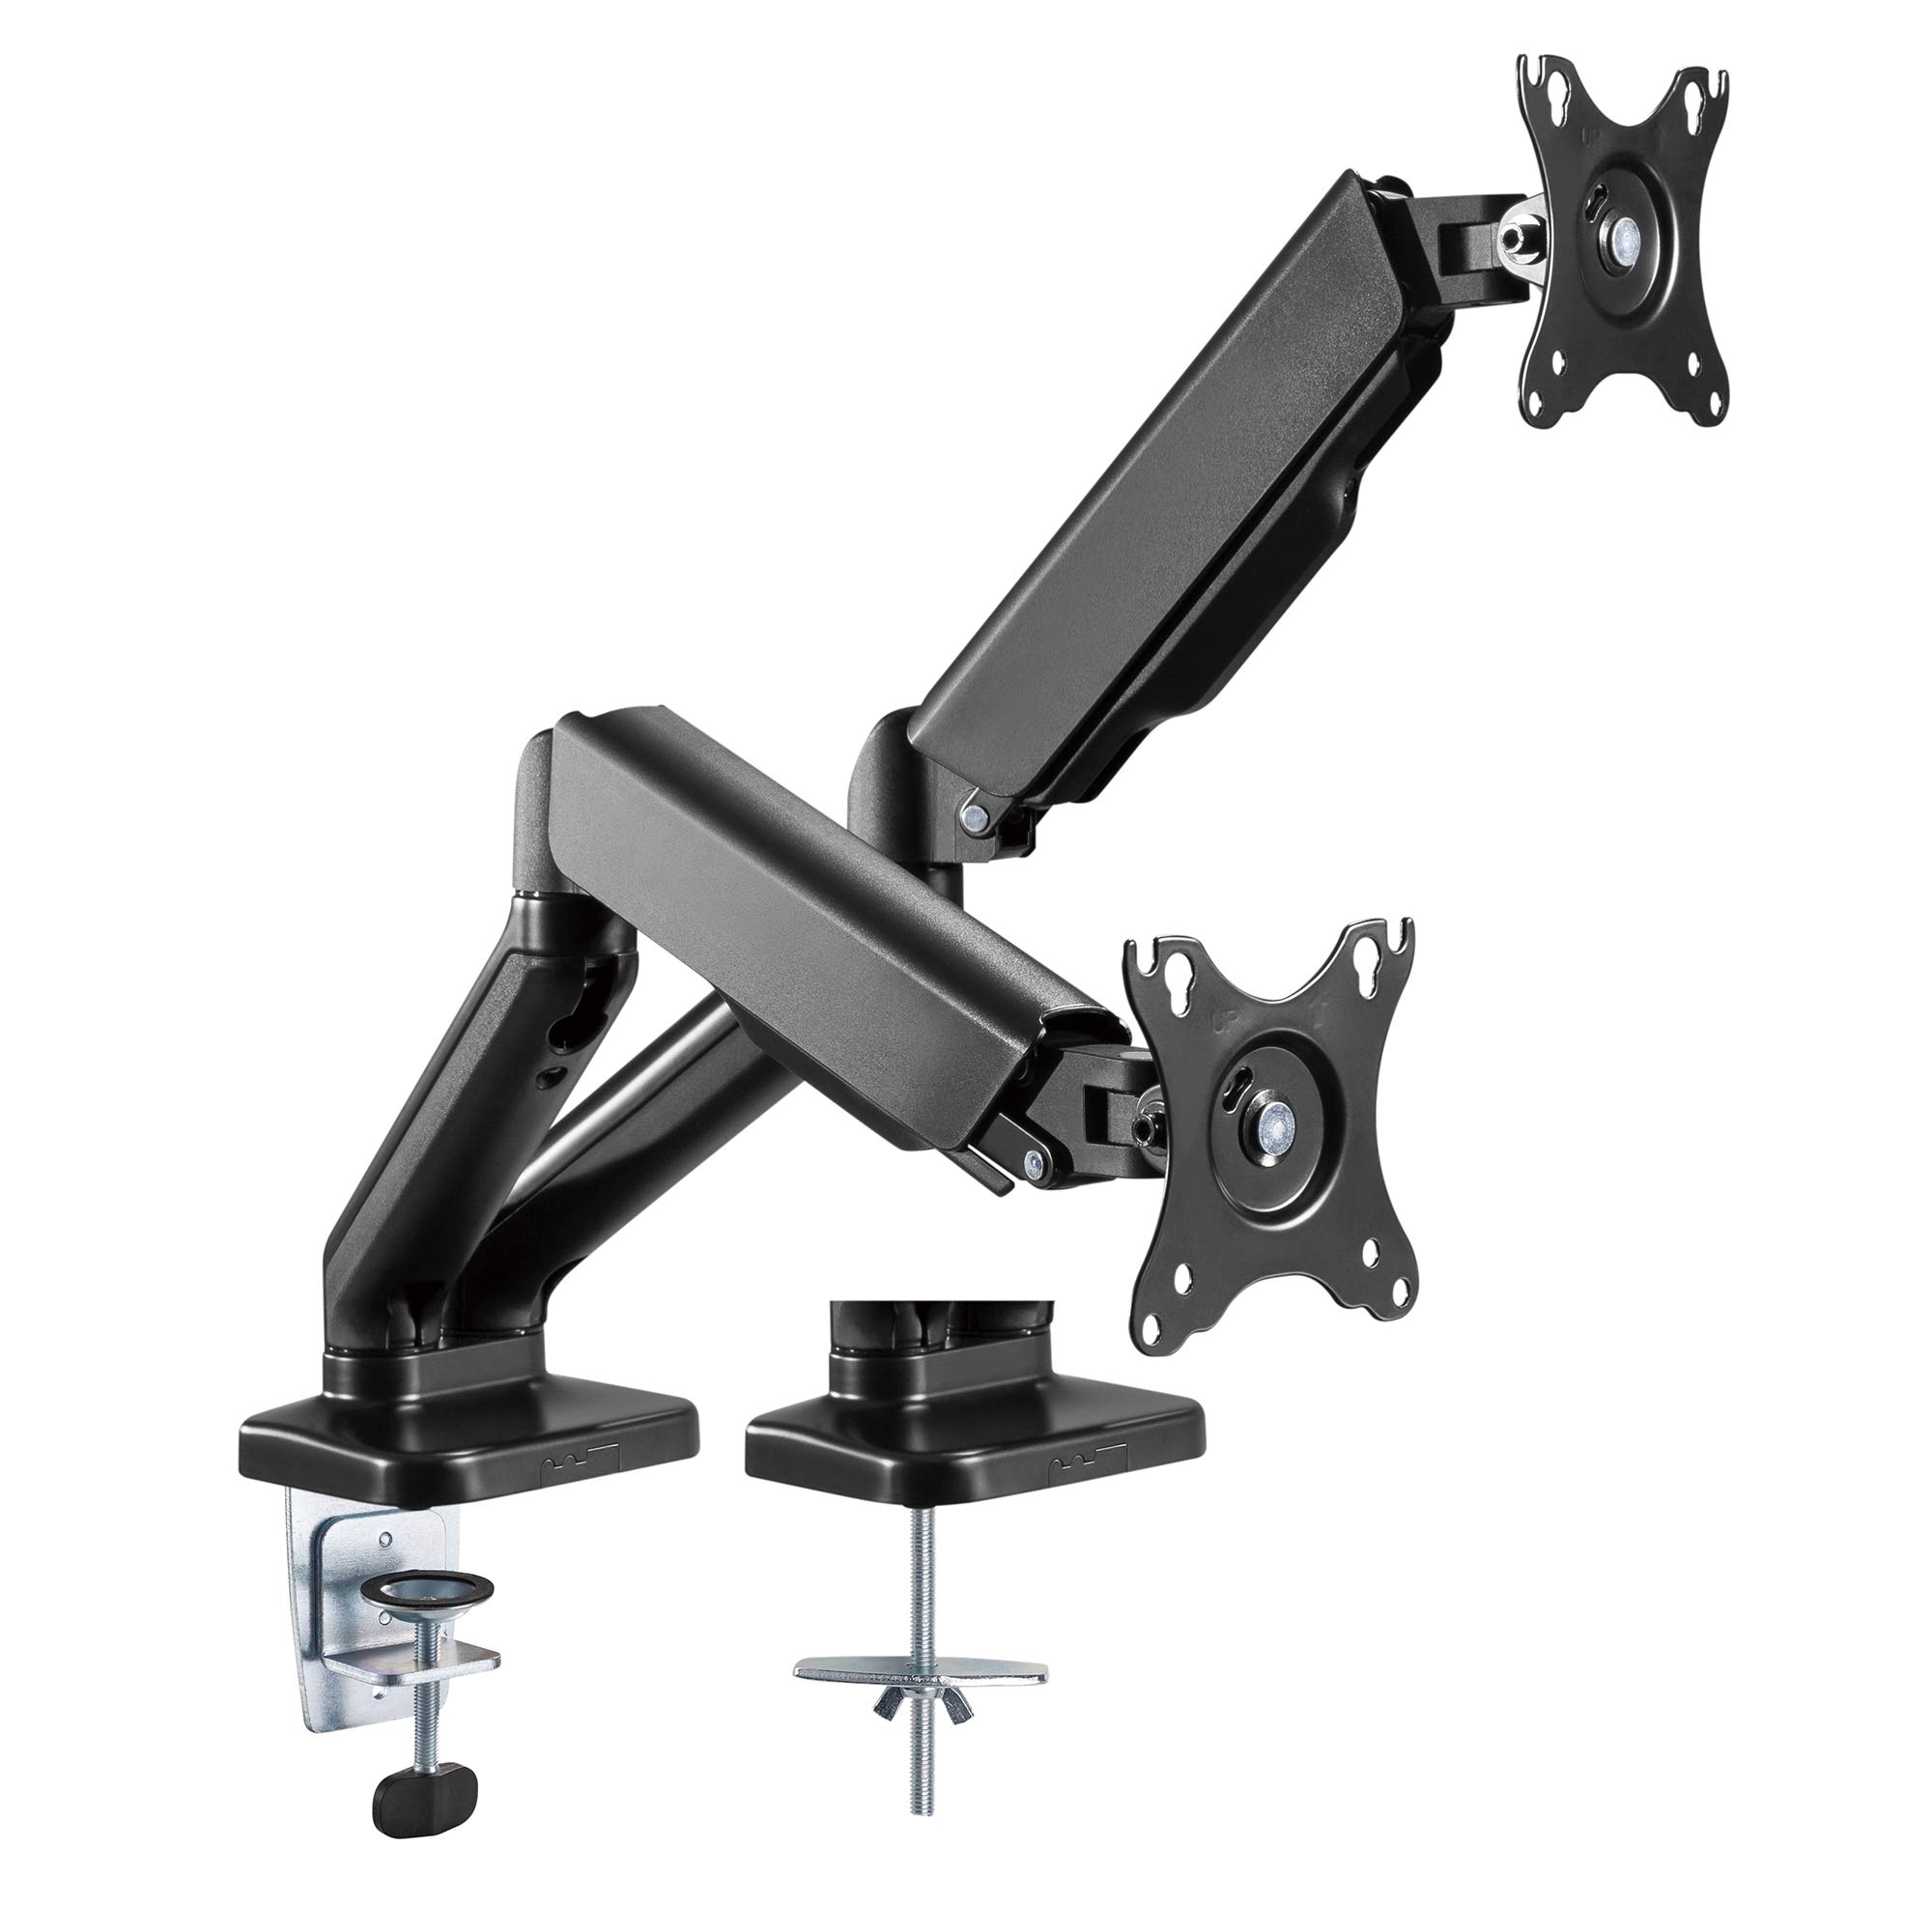 AVLT Dual 27" Monitor Desk Mount Stand - Mount Two 27" Screens on Height Adjustable Gas Spring Arms Space Saver Both C-Clamp & Grommet Moun...